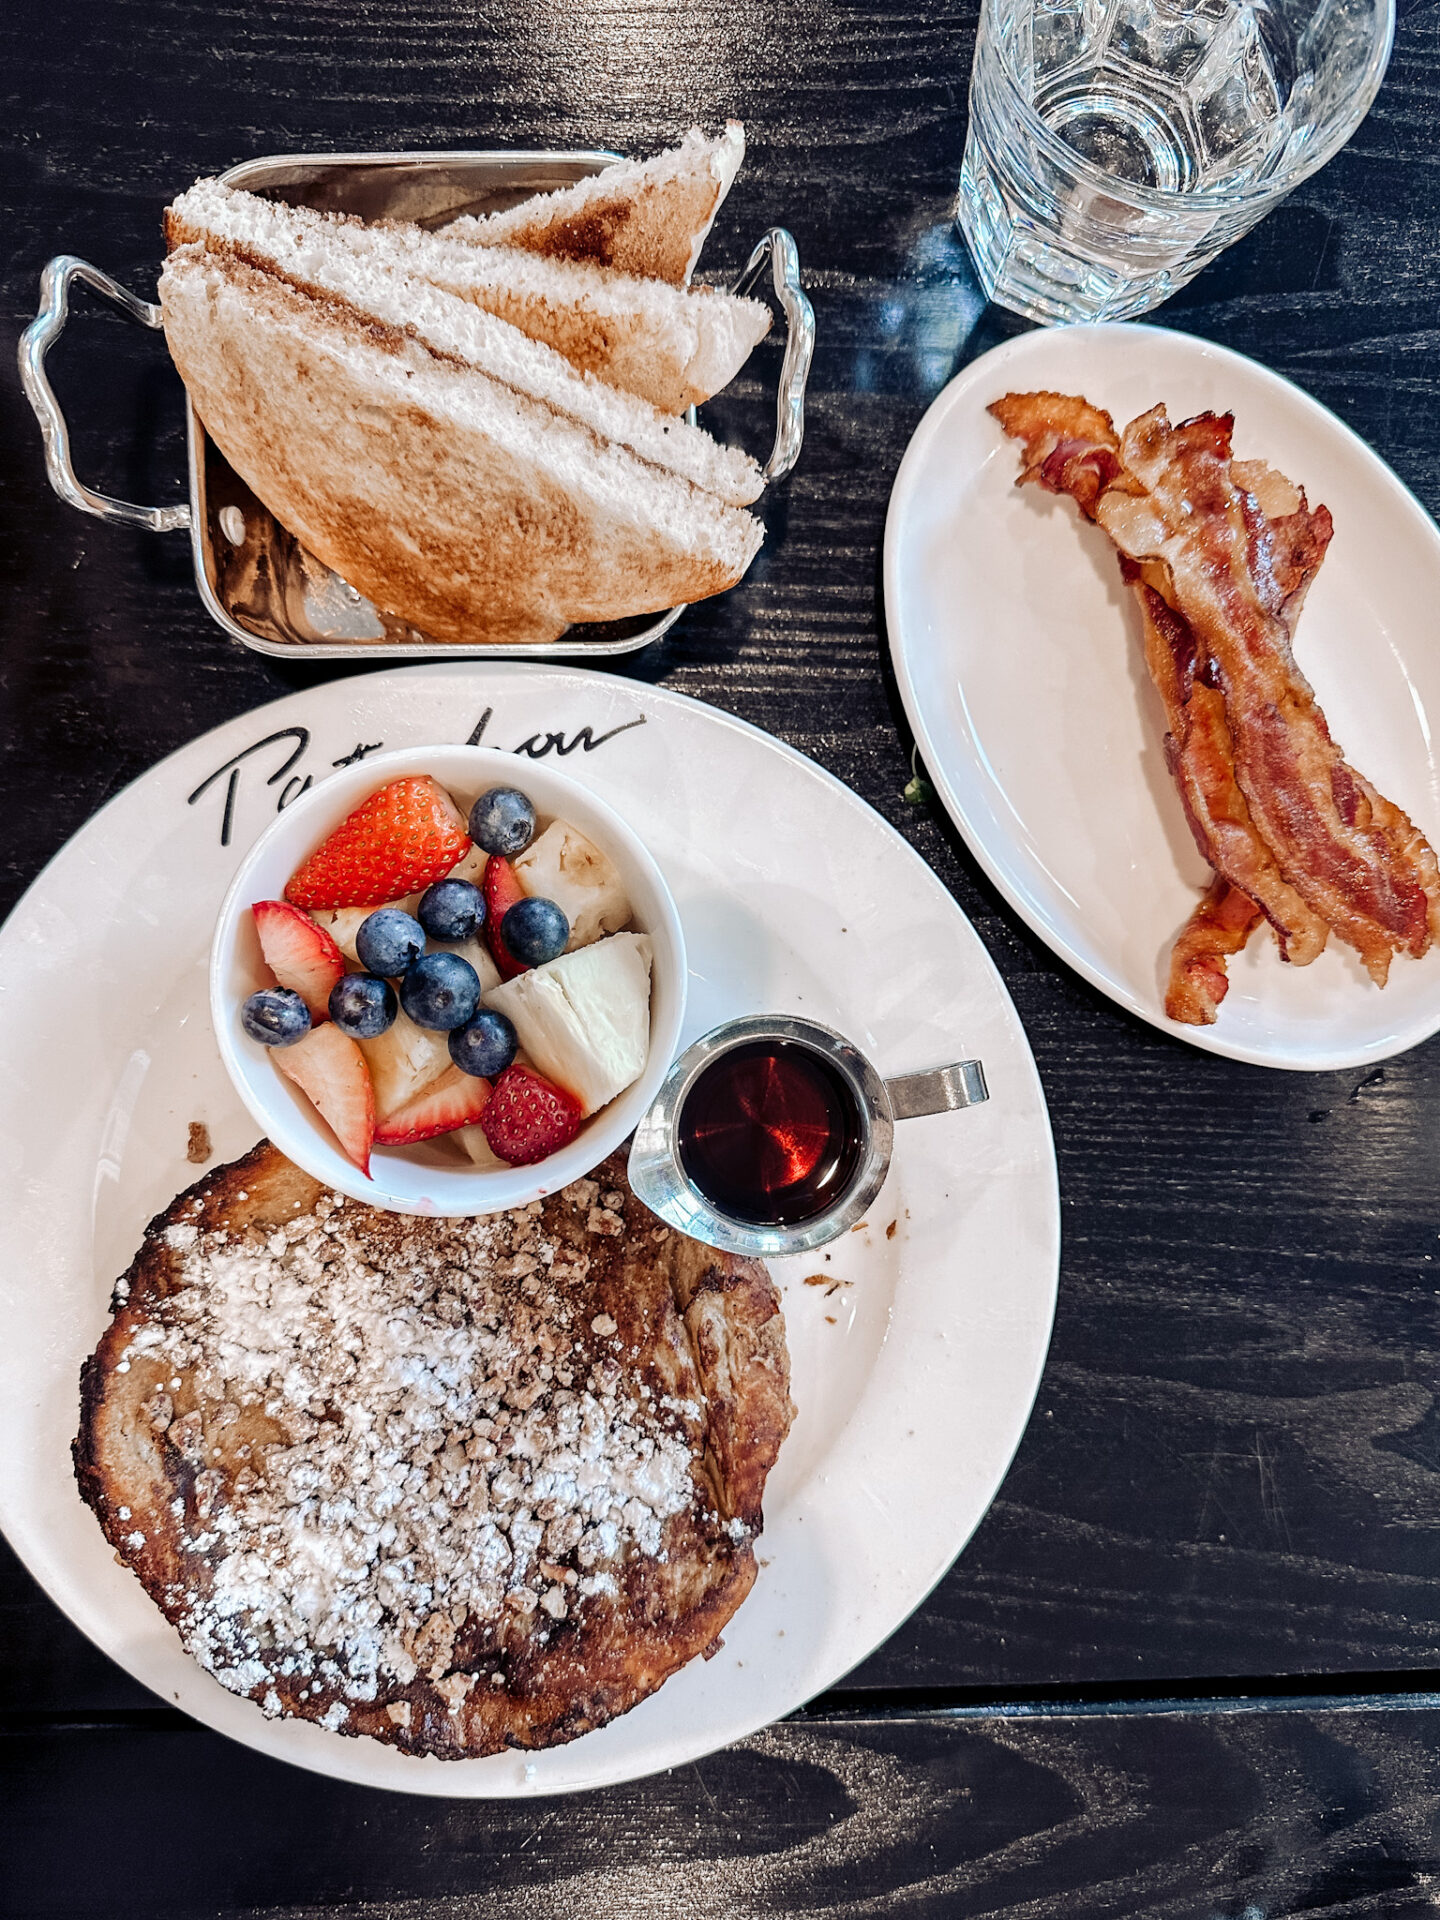 Patachou restaurant breakfast review downtown Indianapolis, IN by travel blogger Angela Lanter